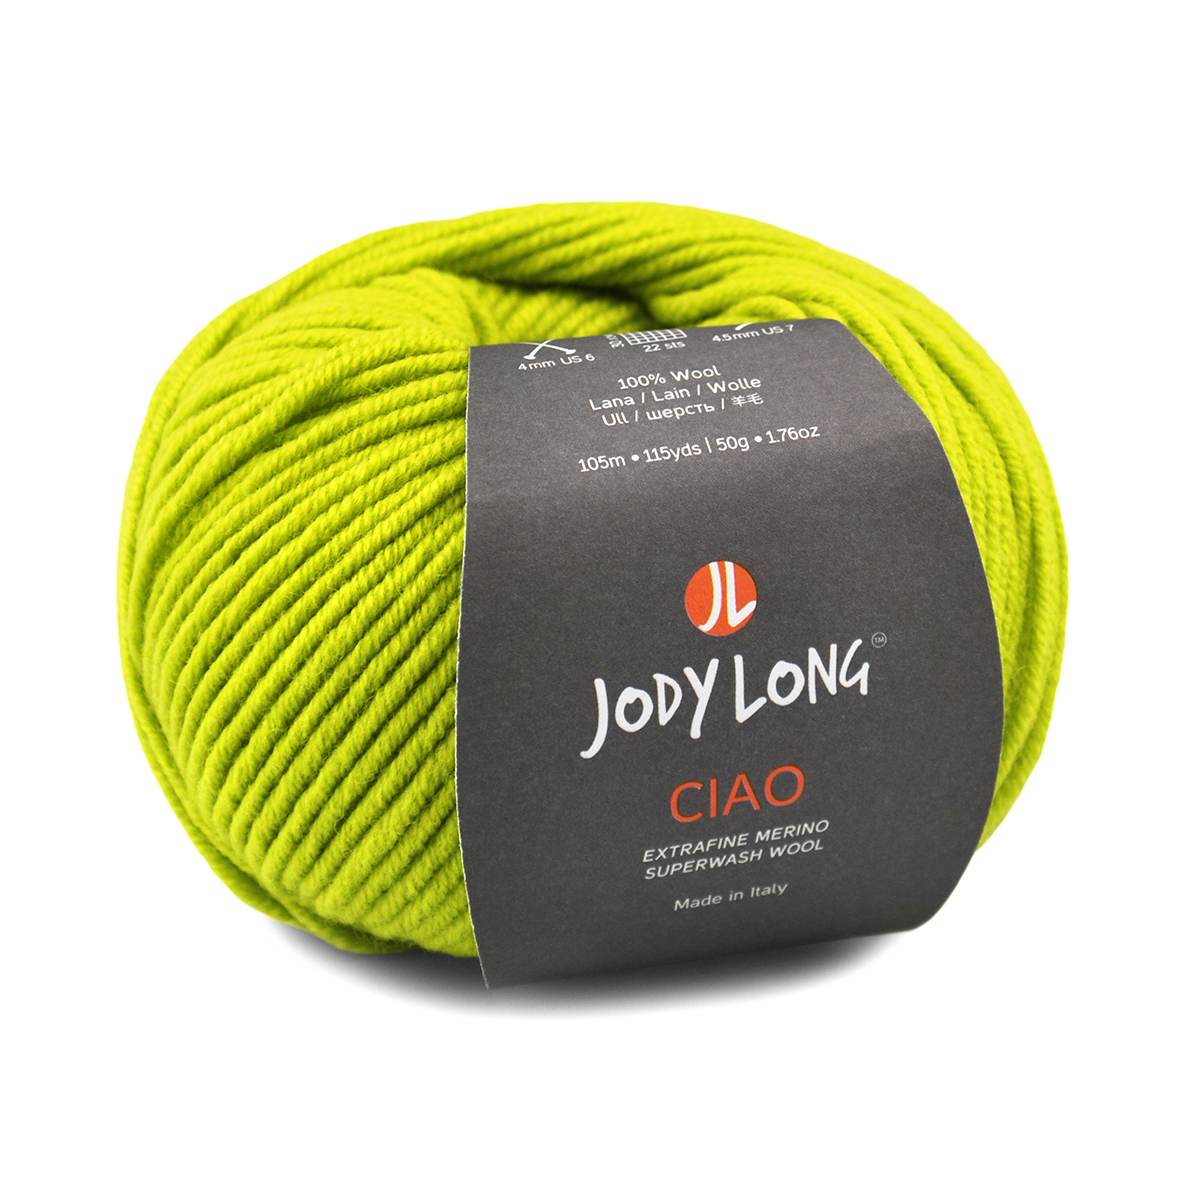 a skein of Ciao